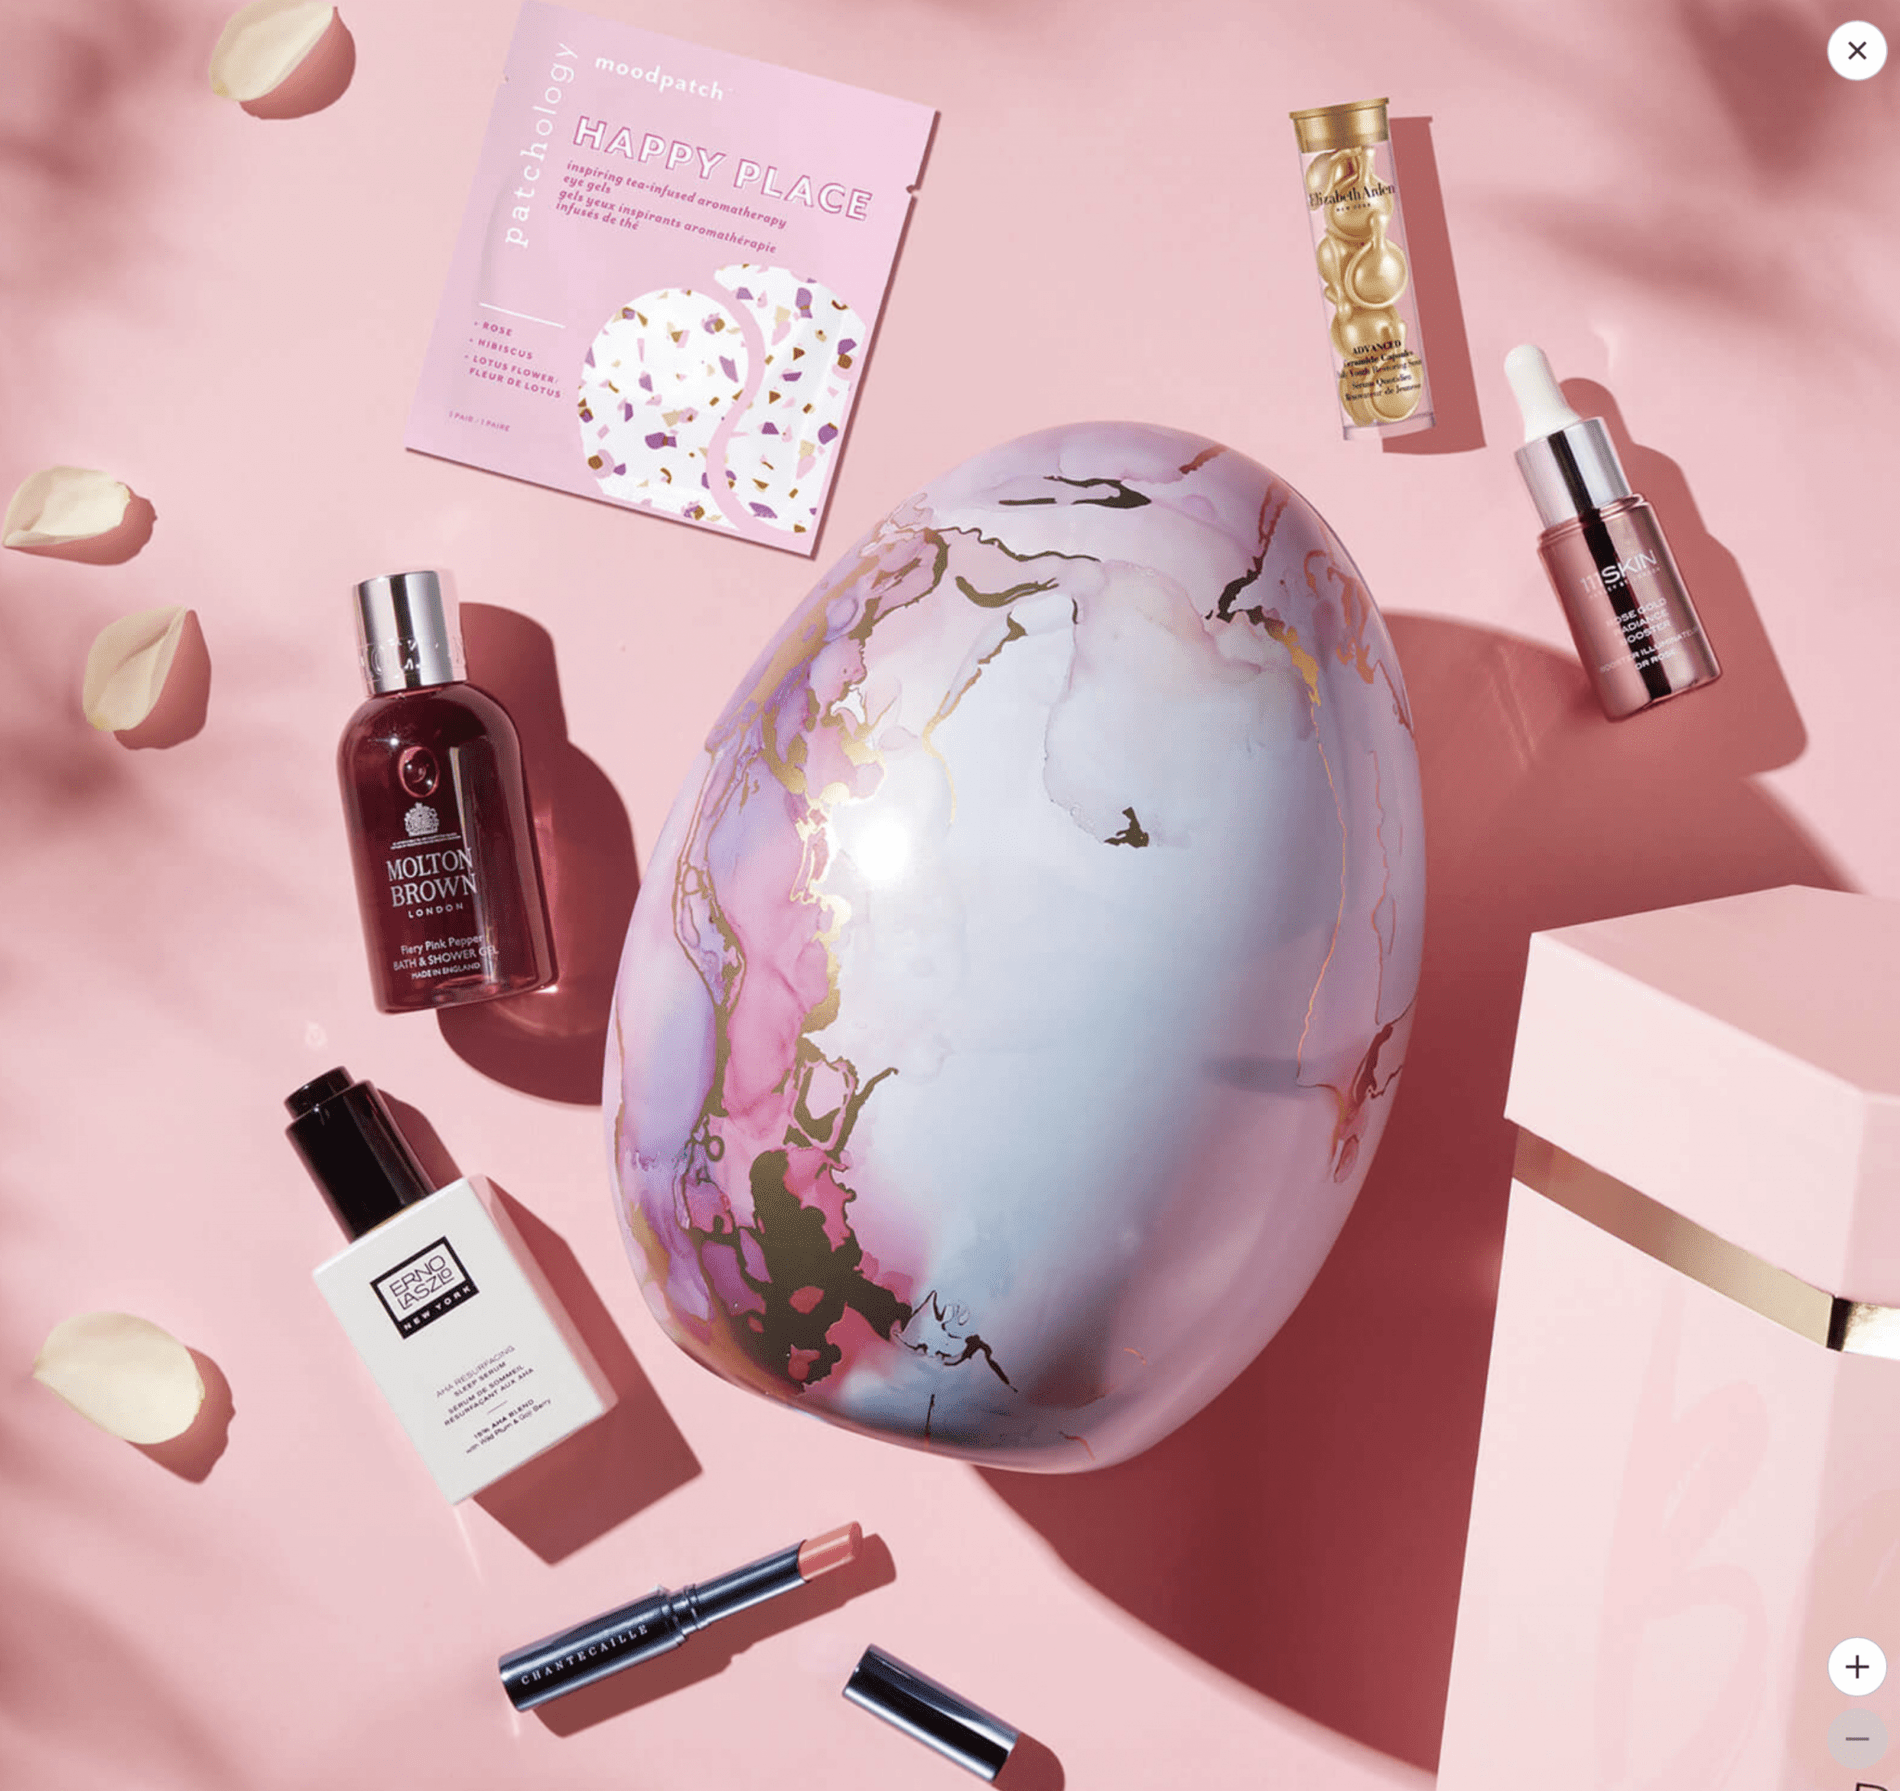 lookfantastic The Beauty Egg Collection 2021 – On Sale Now + Free Gift